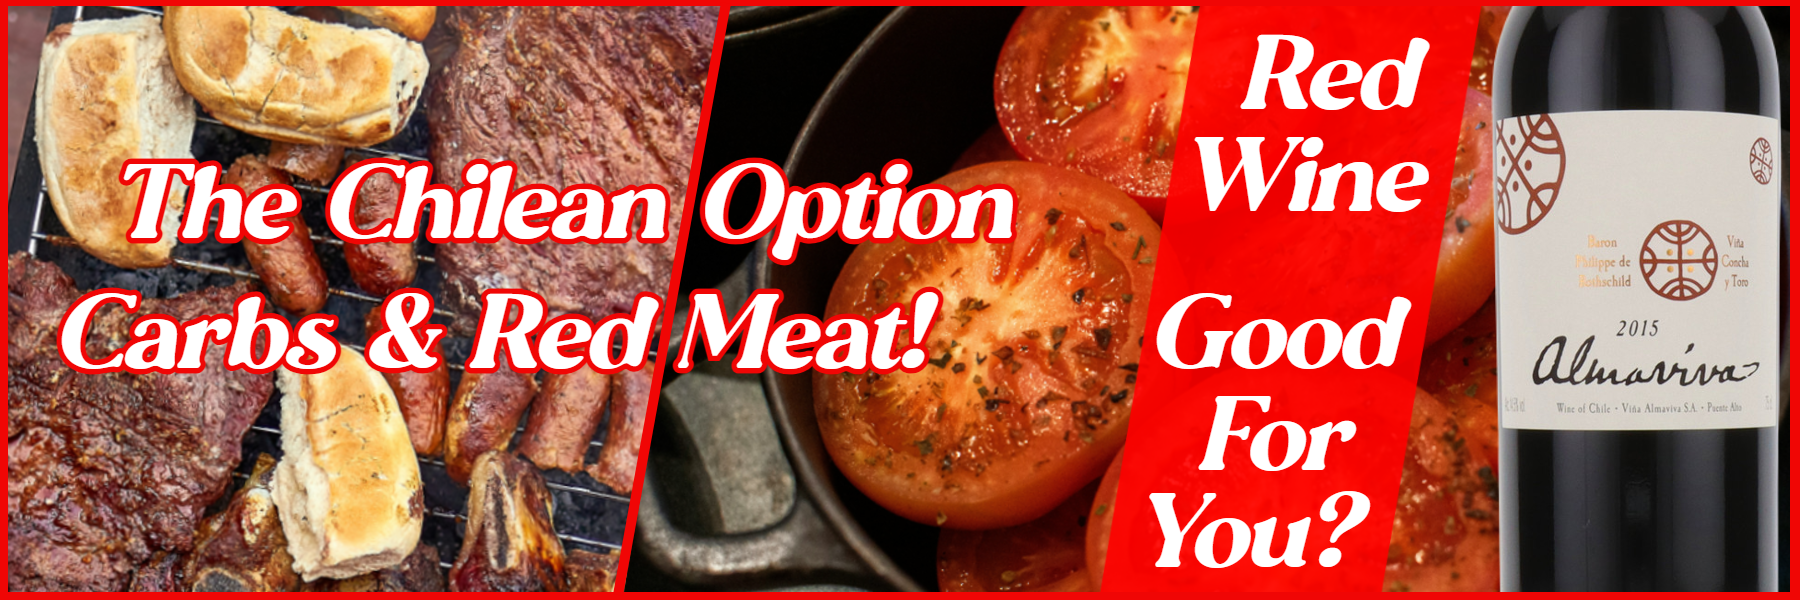 The Chilean option ~ Carbs & Red Meat